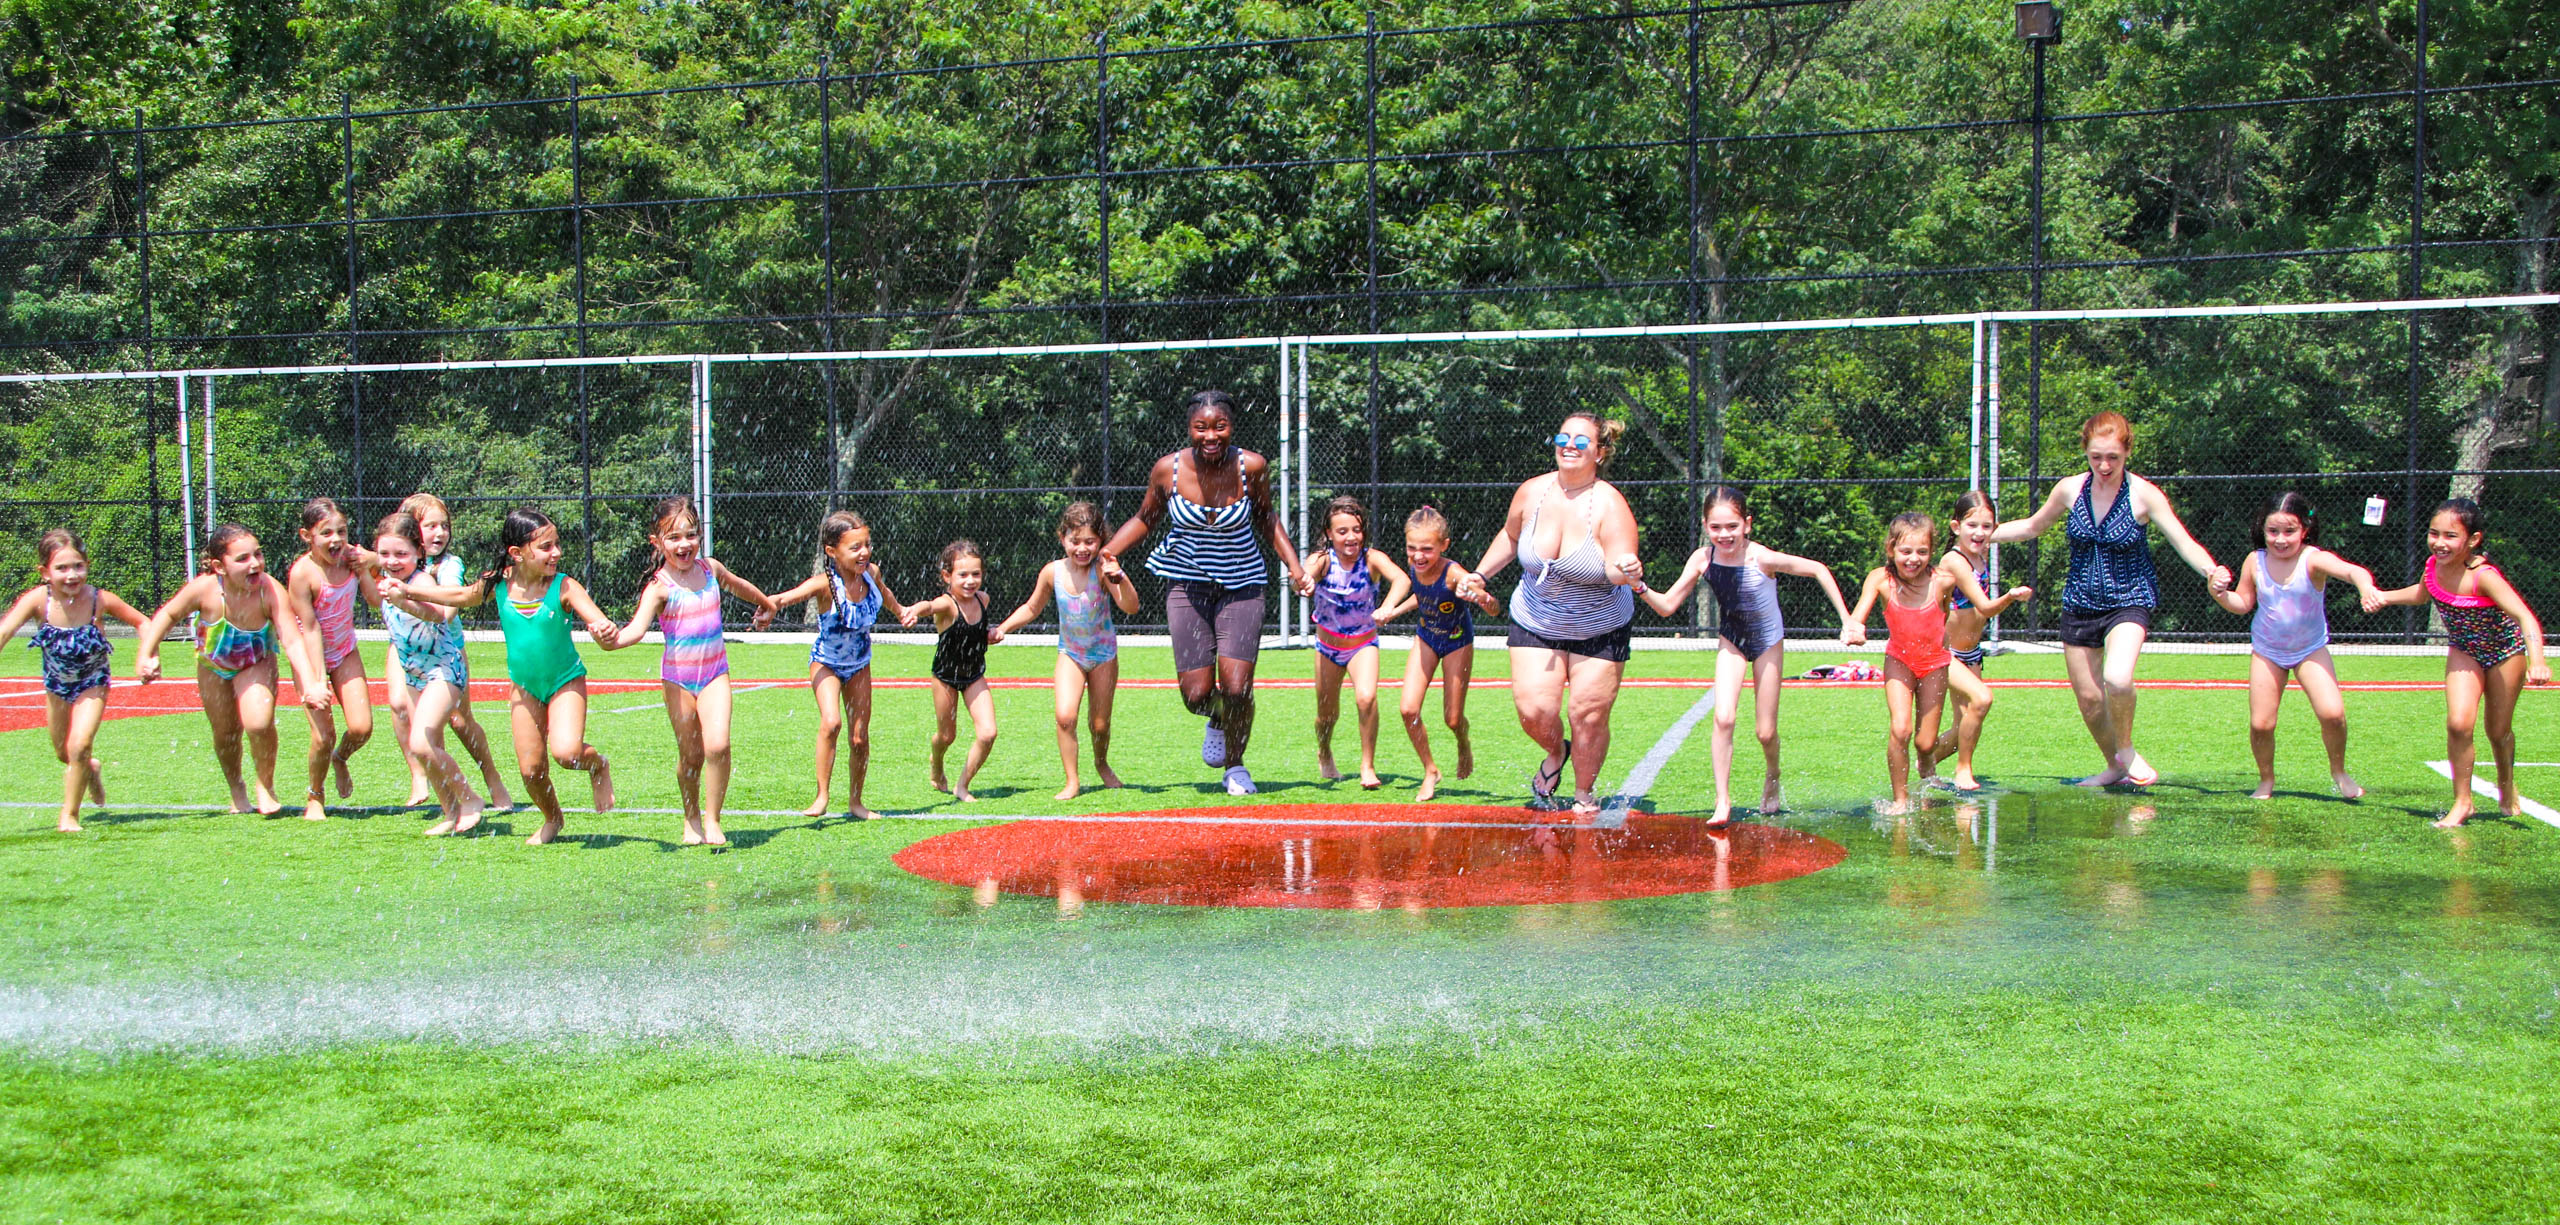 Campers and counselors hand in hand running through sprinklers.